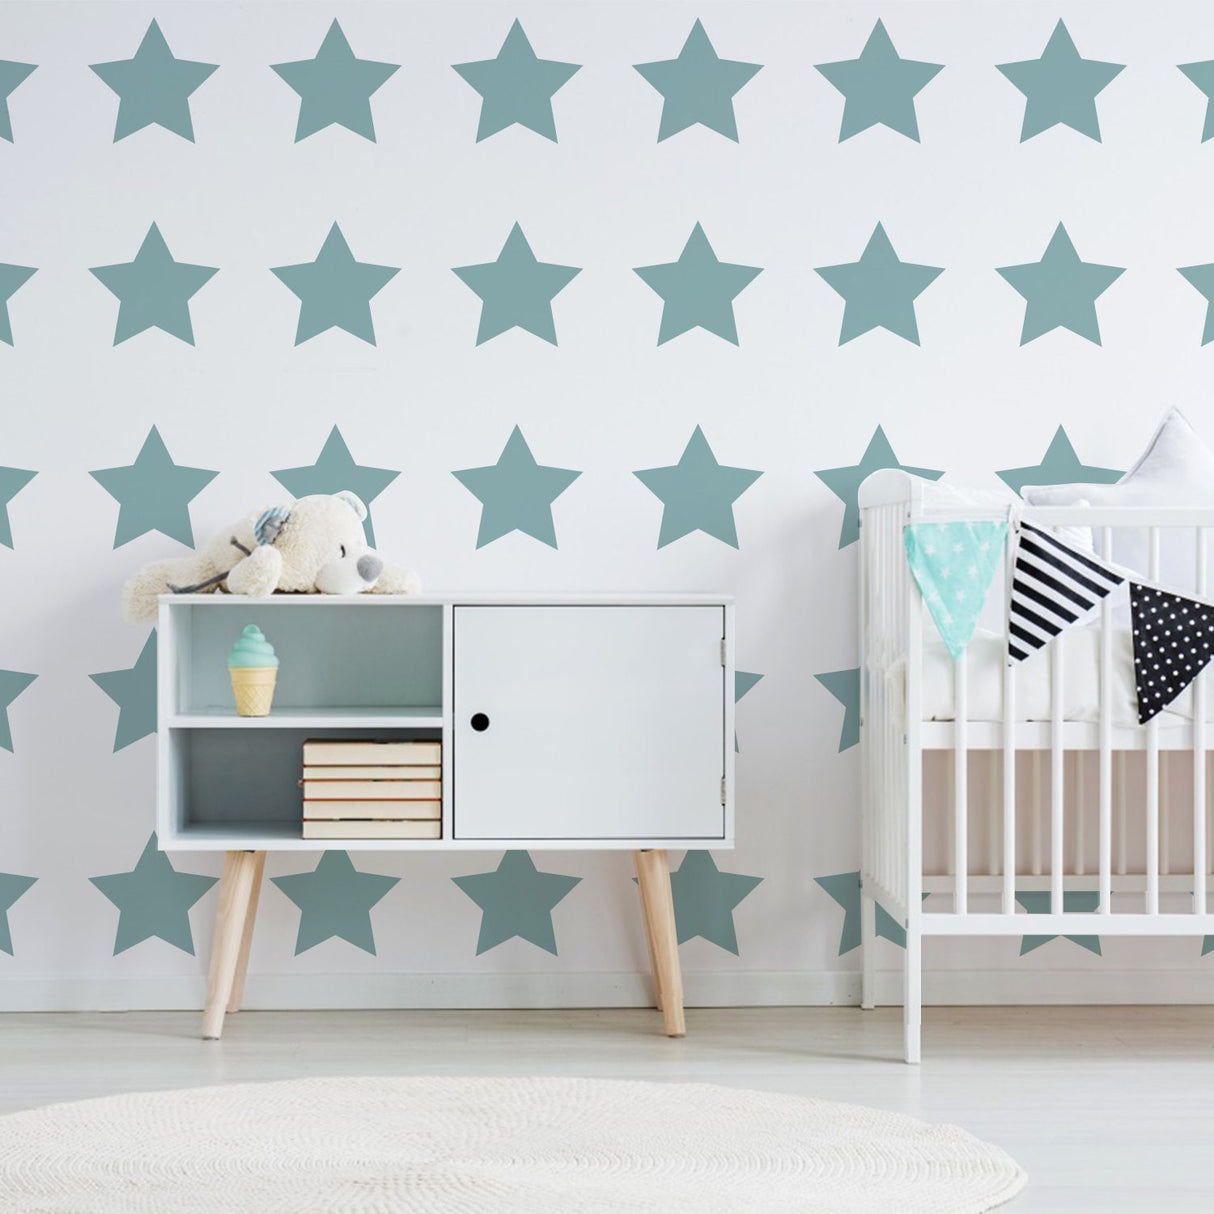 40x Stars Decor Wall Decals For Nursery - Removable Star Vinyl Room Stickers